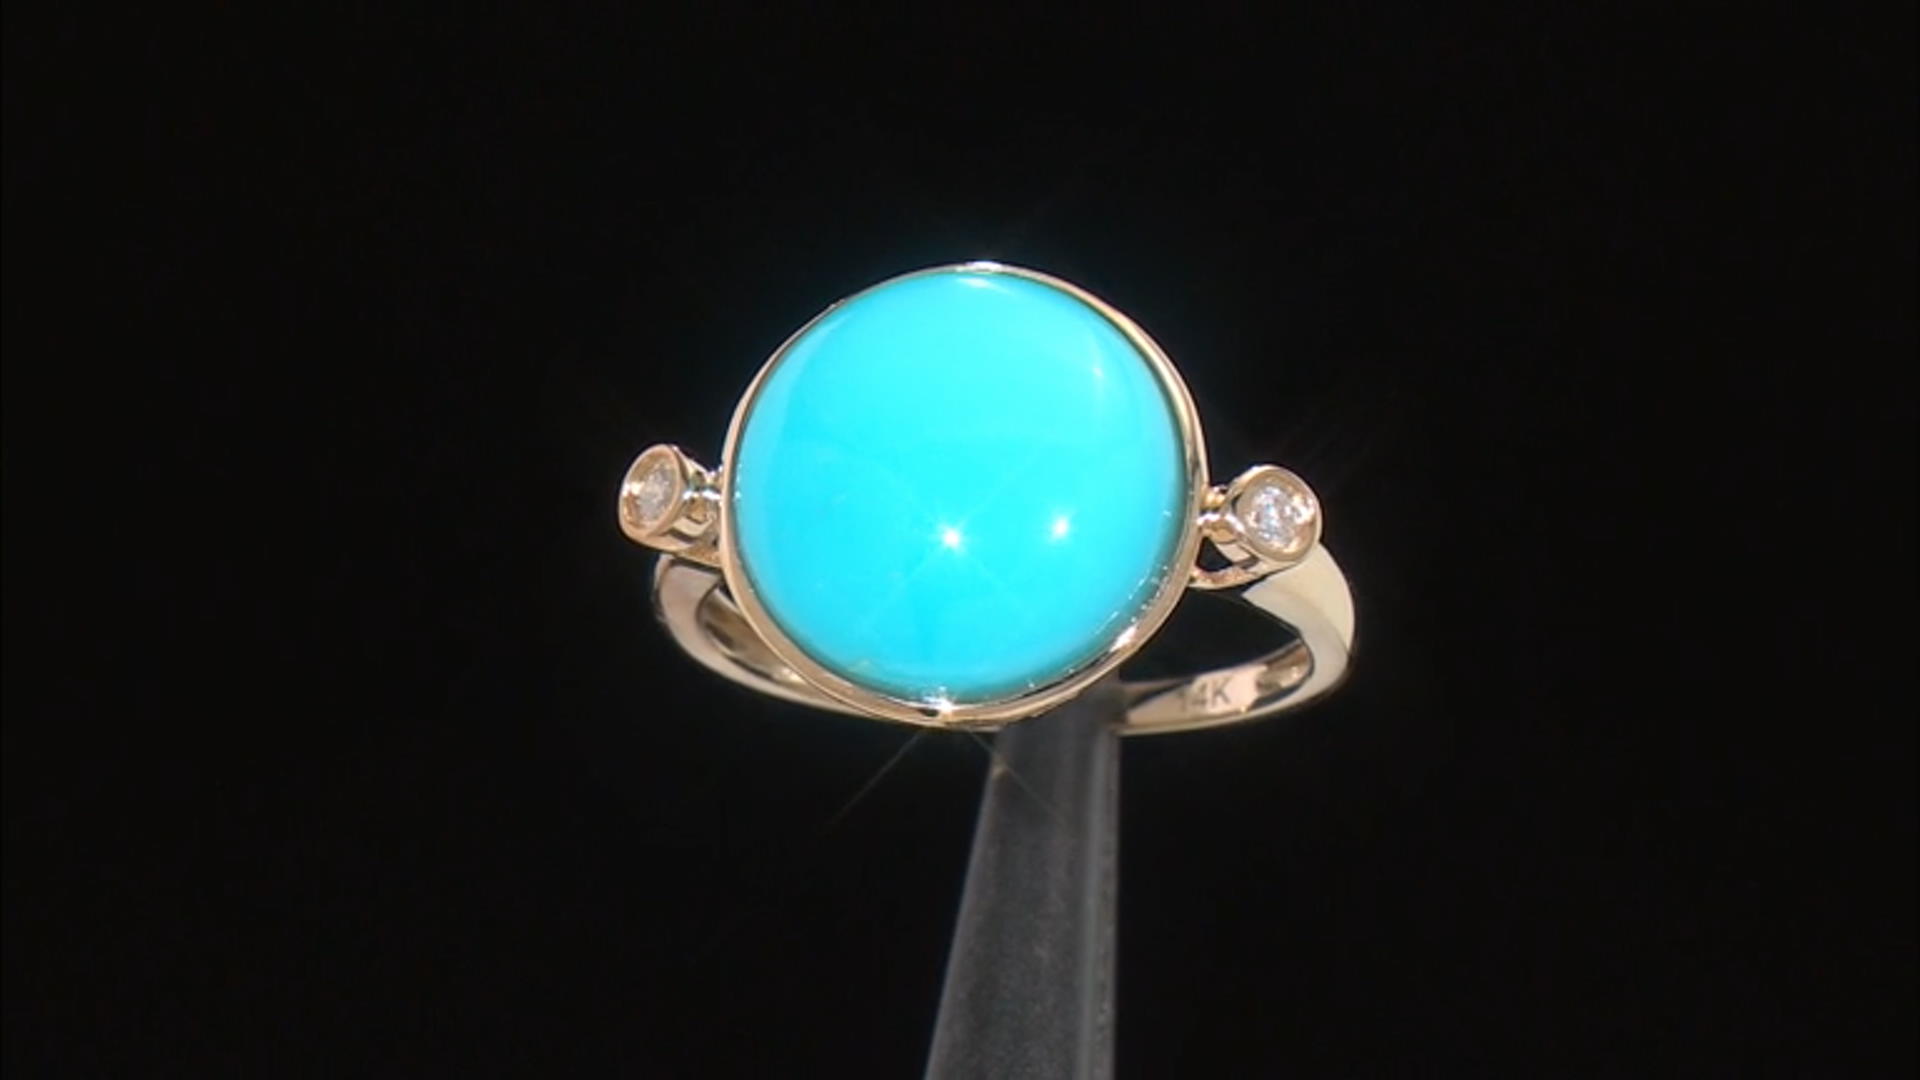 Blue Sleeping Beauty Turquoise 14k Yellow Gold Ring Video Thumbnail